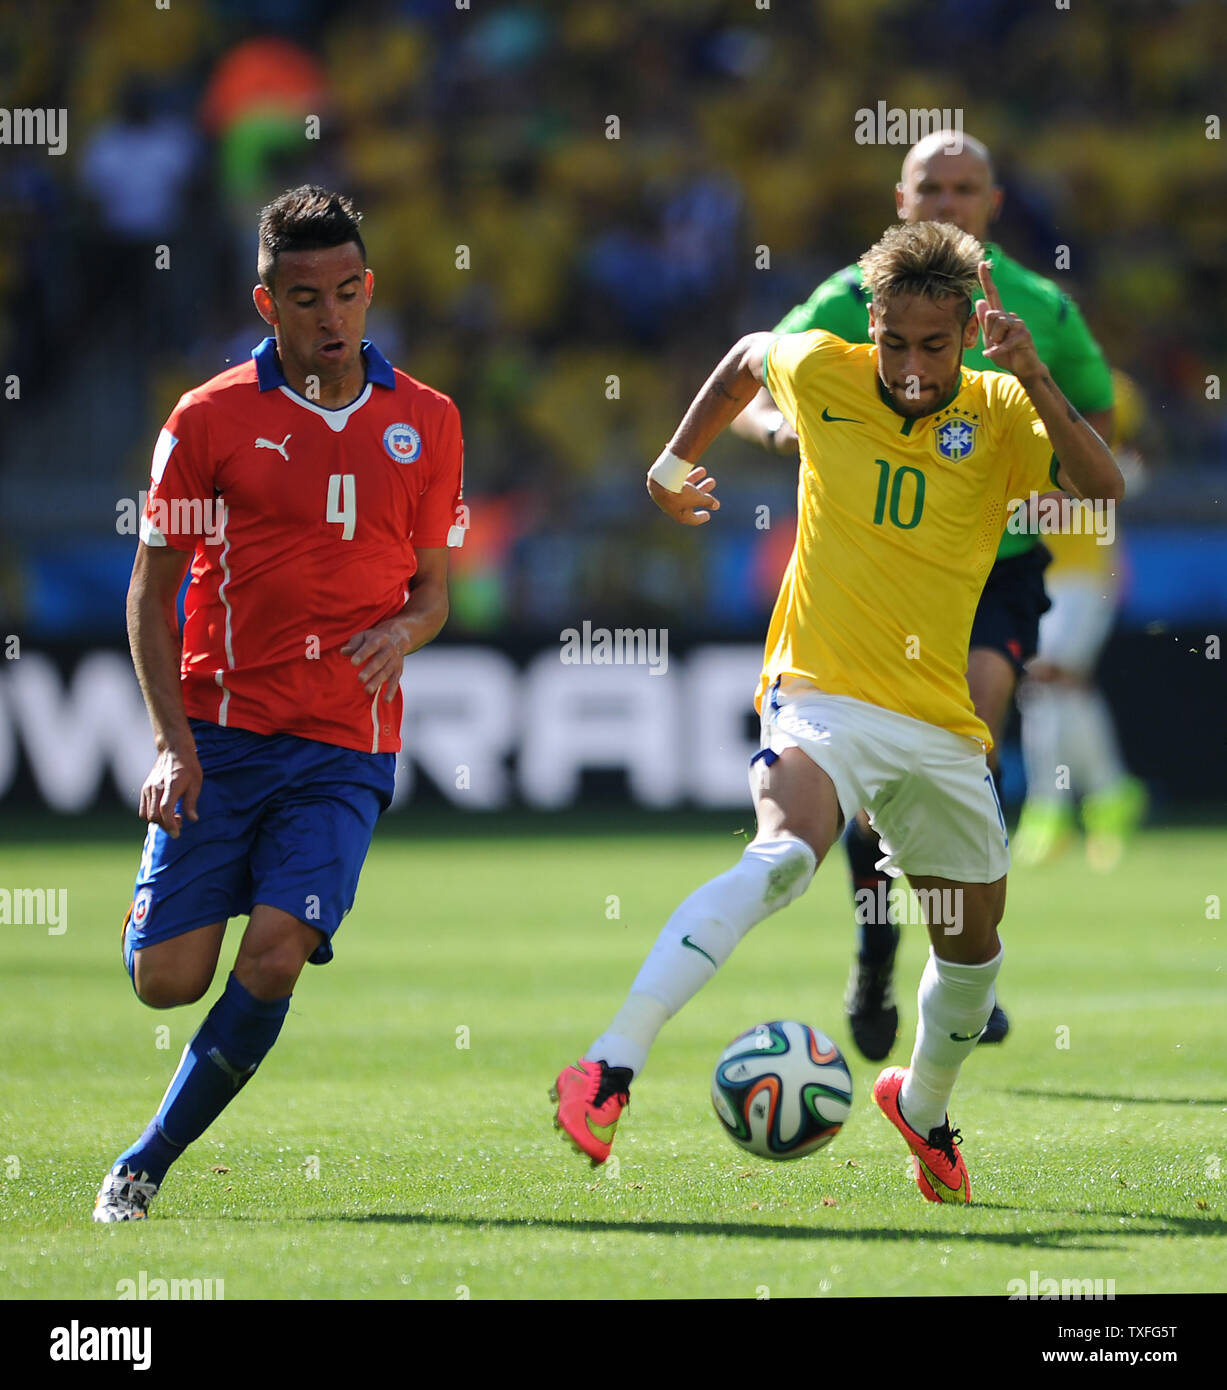 Neymar of Brazil competes with Mauricio Isla (L) of Chile during the 2014 FIFA World Cup Round of 16 match at the Estadio Mineirao in Belo Horizonte, Brazil on June 28, 2014. UPI/Chris Brunskill Stock Photo